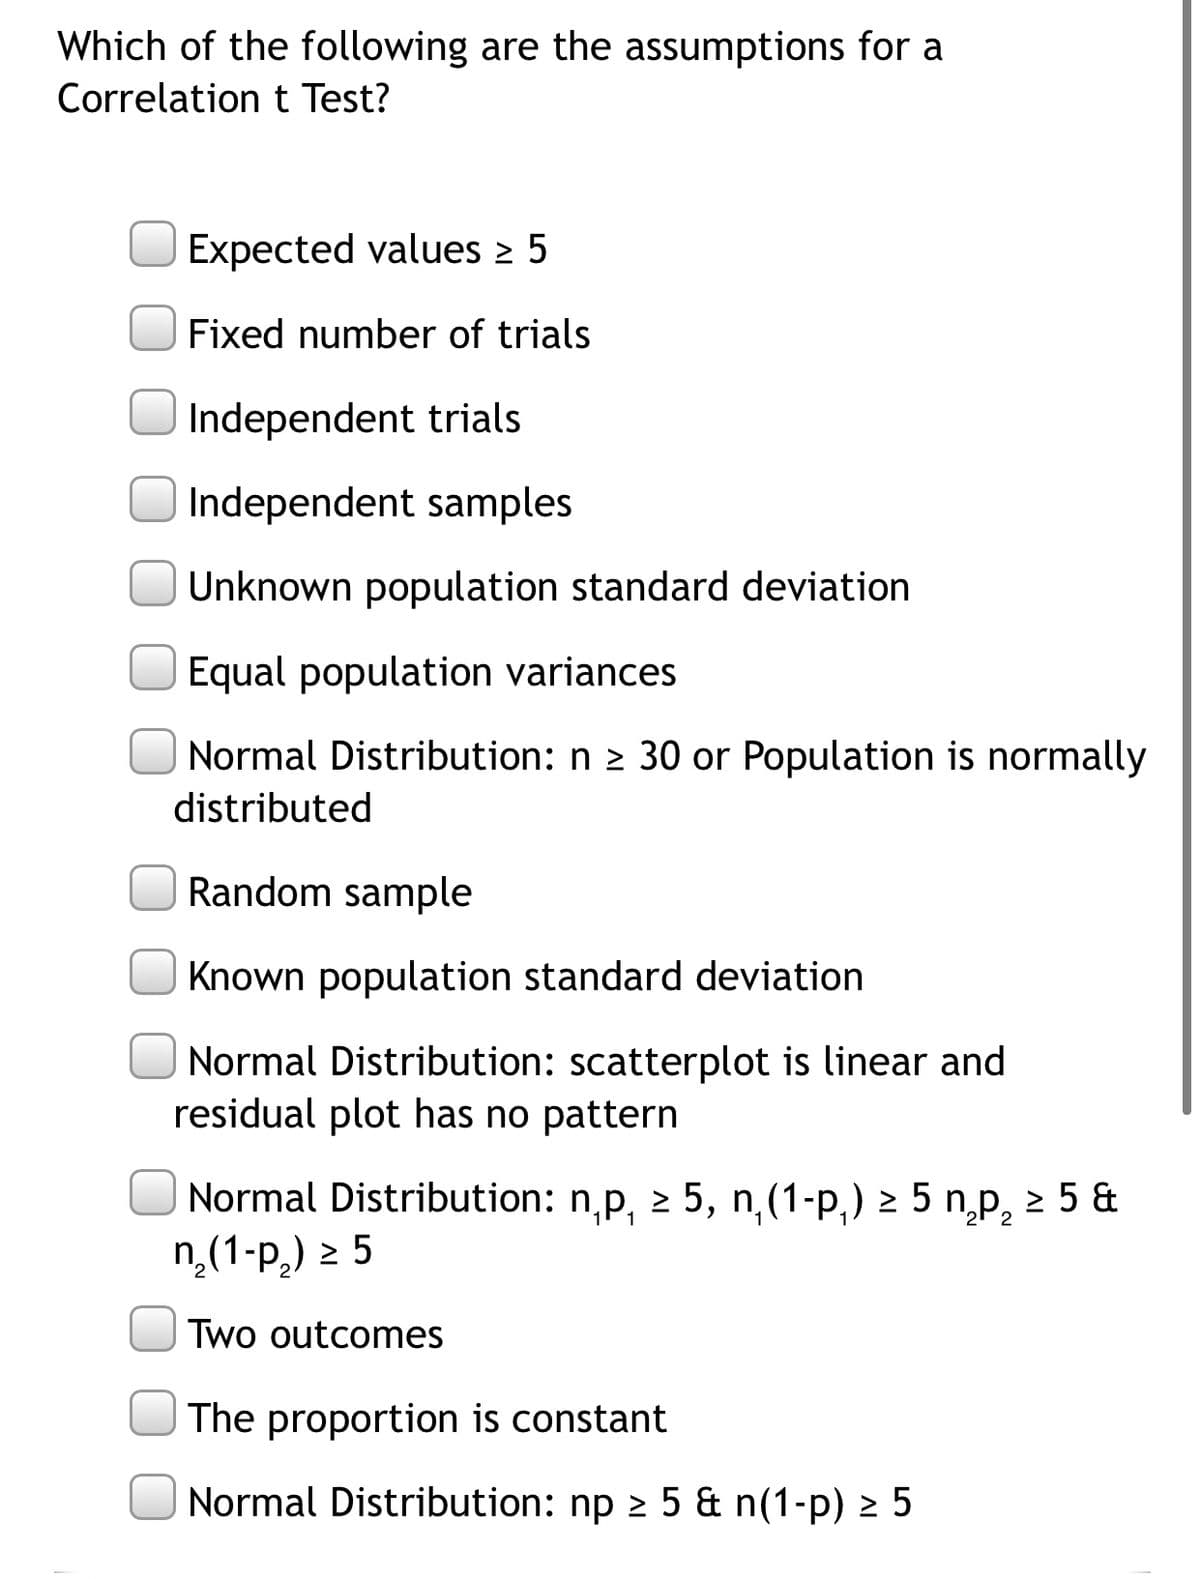 Which of the following are the assumptions for a
Correlation t Test?
Expected values 2 5
Fixed number of trials
Independent trials
Independent samples
Unknown population standard deviation
Equal population variances
Normal Distribution: n 2 30 or Population is normally
distributed
Random sample
Known population standard deviation
|Normal Distribution: scatterplot is linear and
residual plot has no pattern
Normal Distribution: n,p, 2 5, n,(1-p,) 2 5 n,p, 2 5 &
n,(1-p,) 2 5
Two outcomes
The proportion is constant
Normal Distribution: np 2 5 & n(1-p) 2 5
